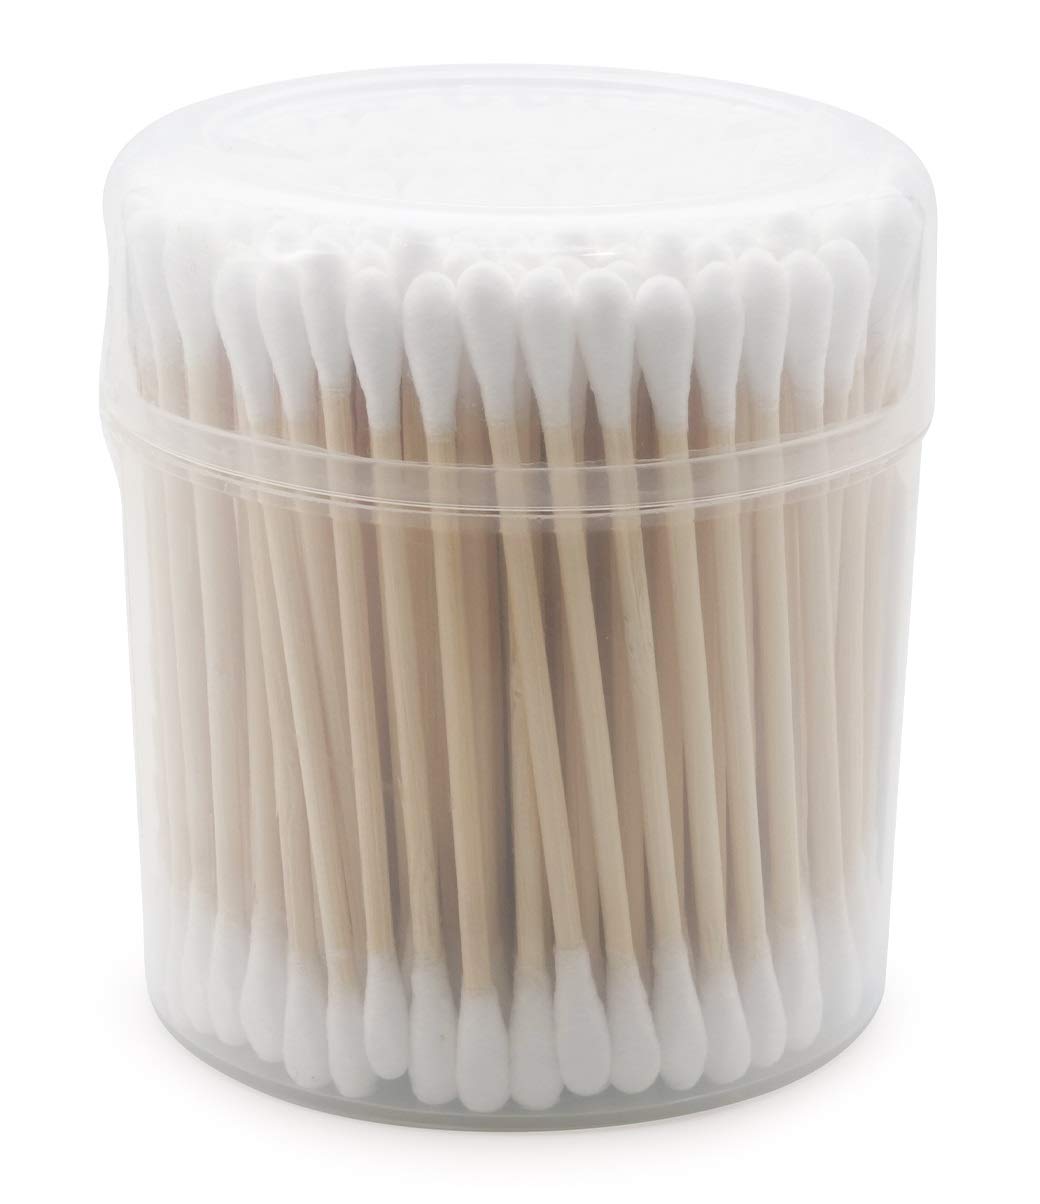 Wooden Cotton Swabs (600 Count) - Biodegradable Cotton Buds, Dual Cotton Tipped Eco Friendly, Made with 100% Wood Great for Makeup, Ears, Cleaning